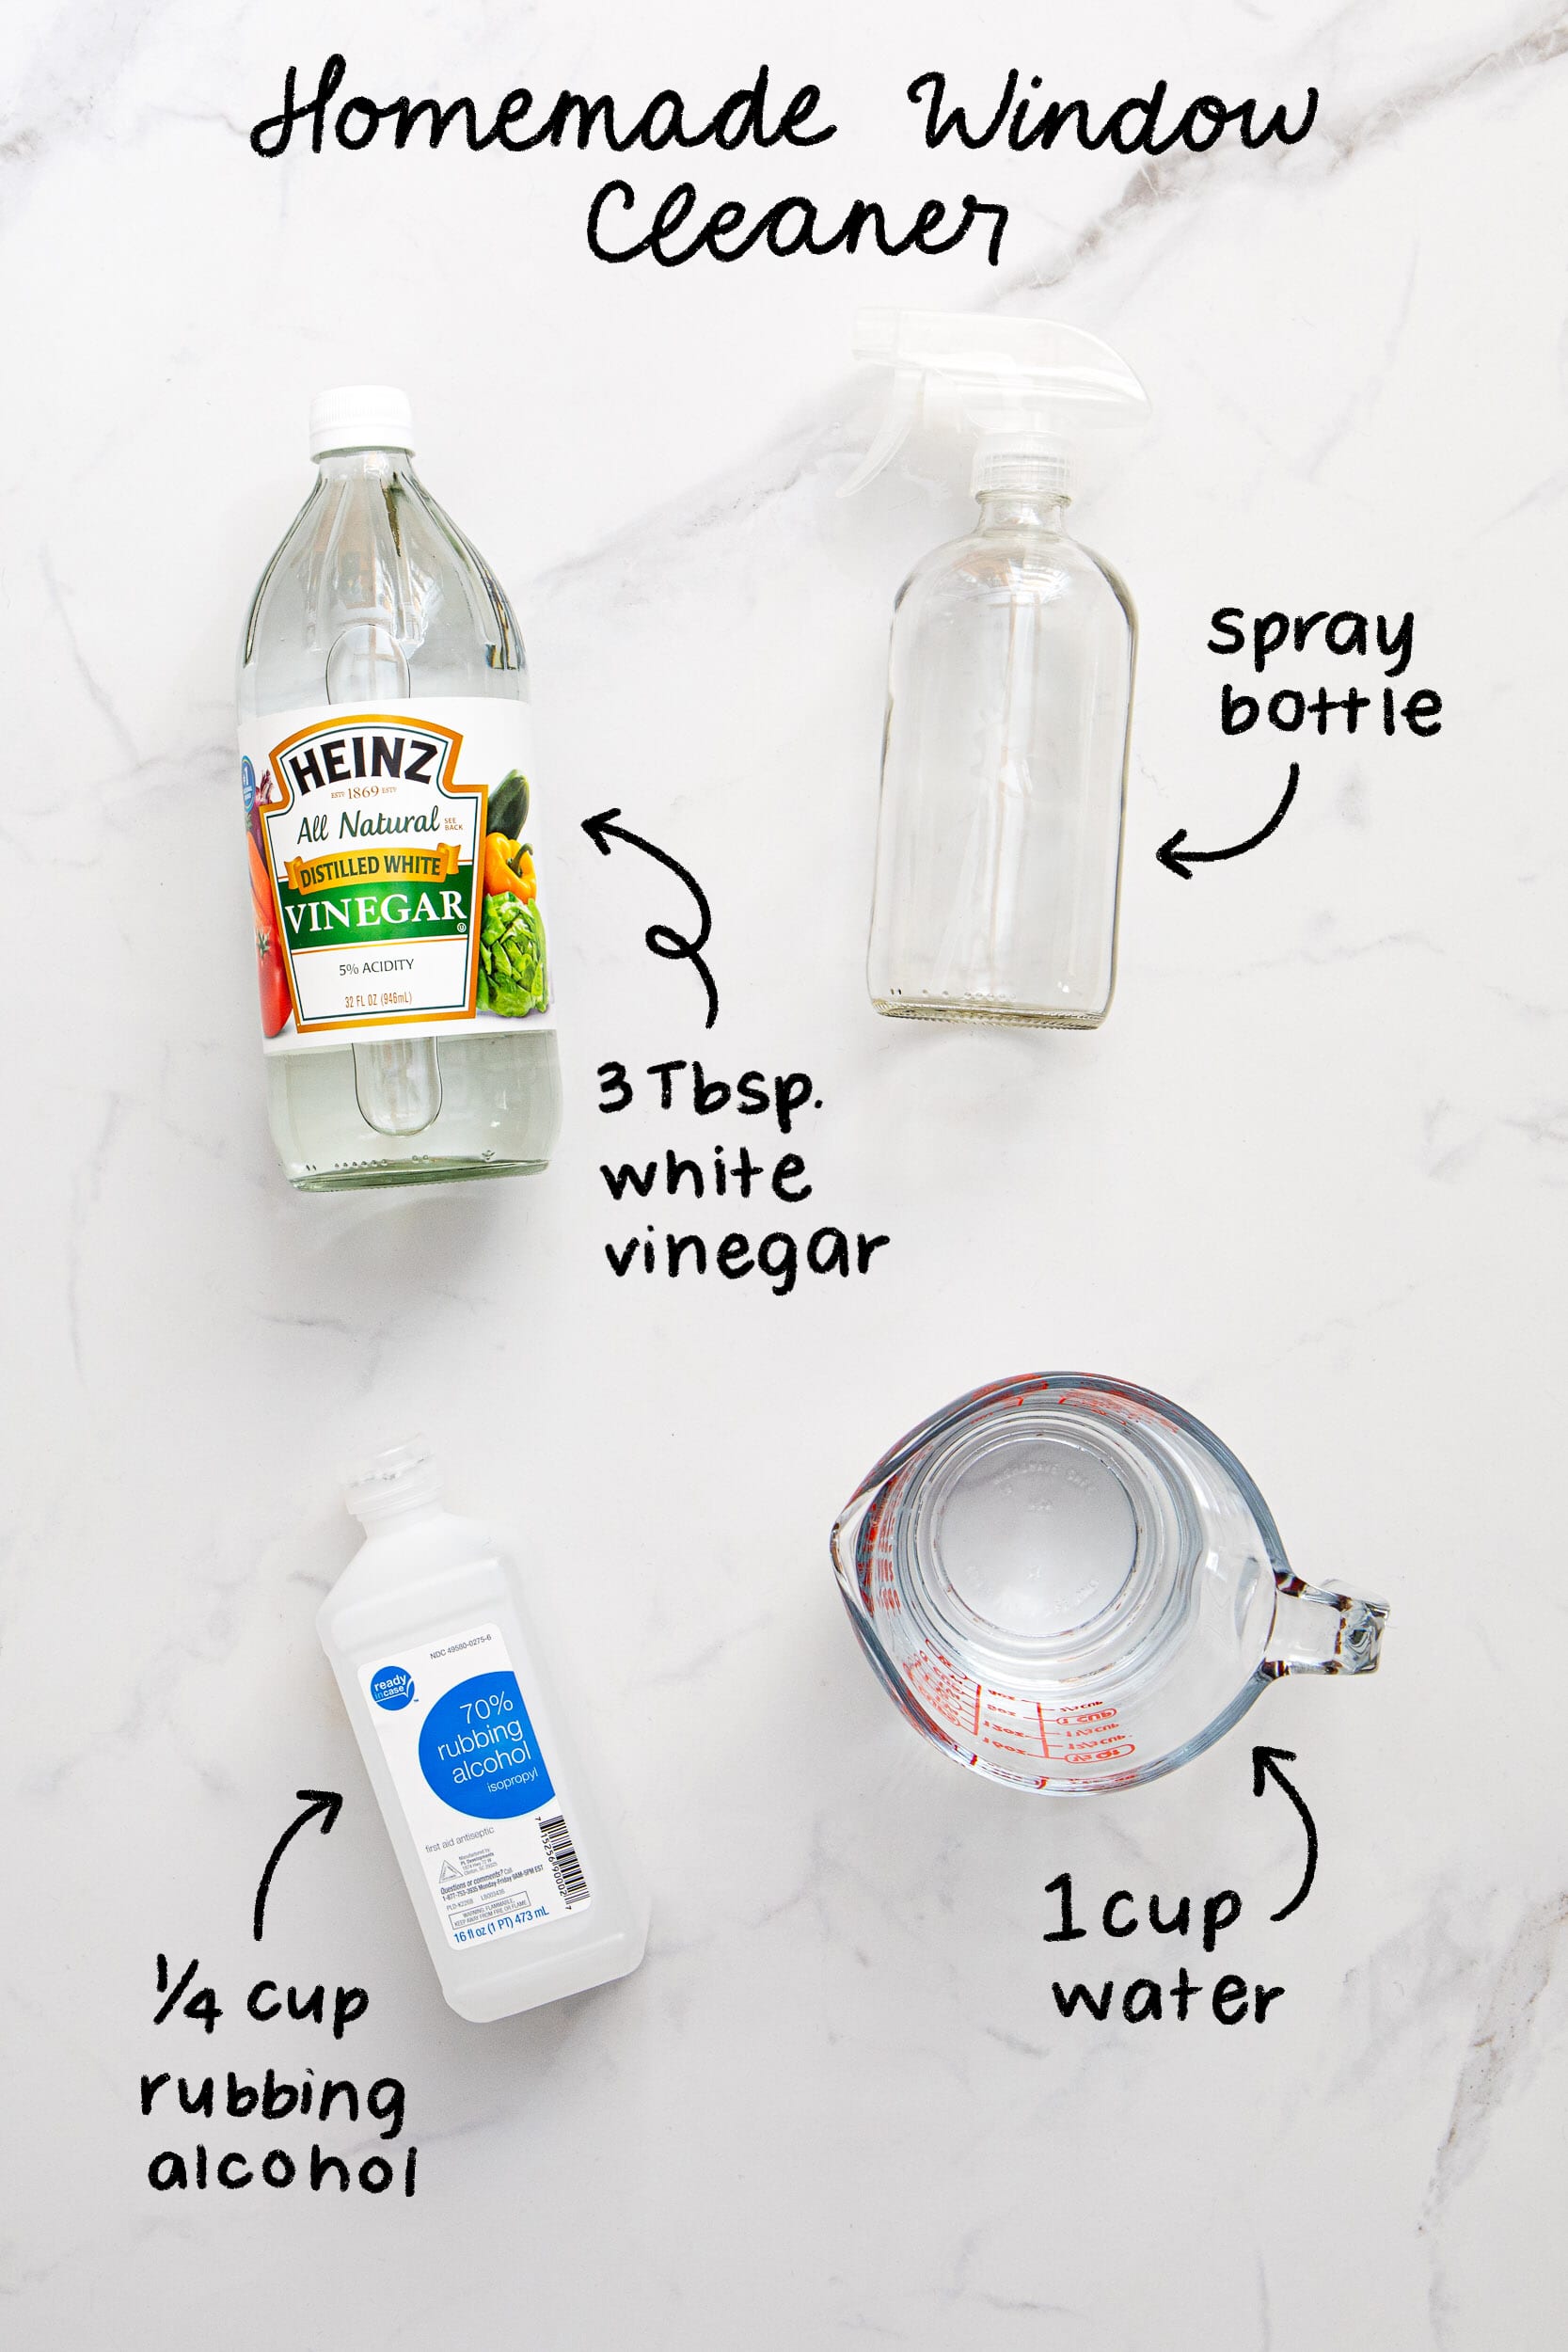 Alissa  DIY • CLEANING on Instagram: DIY shower glass cleaner : - Fill a  spray bottle with white distilled vinegar - Add 1 or 2 Tablespoons of dish  soap Stay on